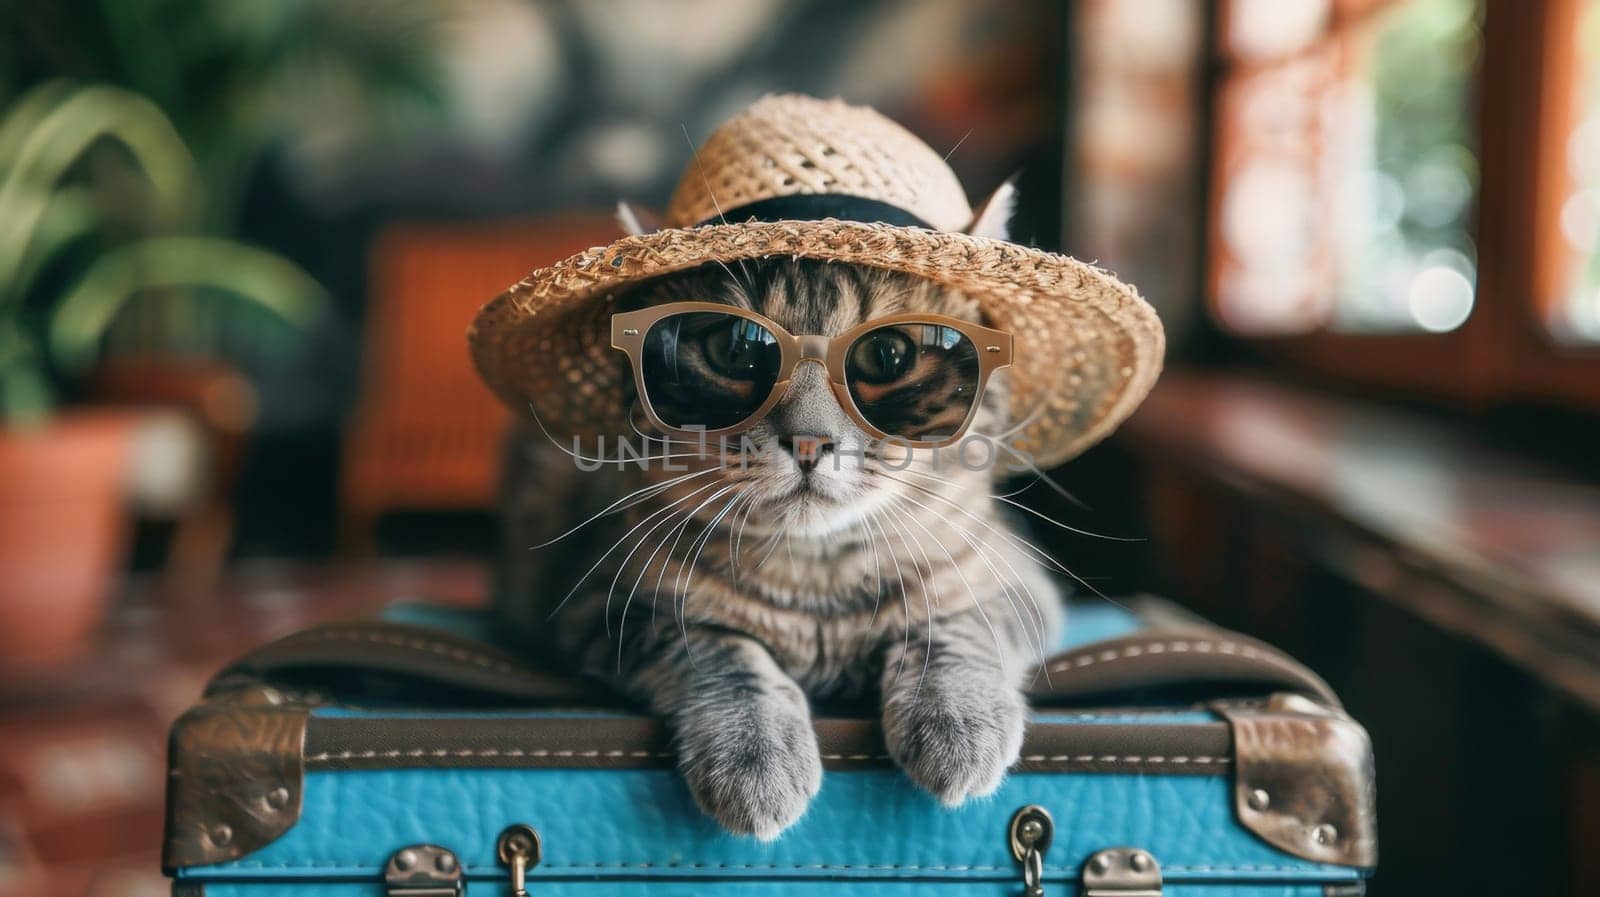 A cat wearing a hat and sunglasses sitting on top of luggage, AI by starush